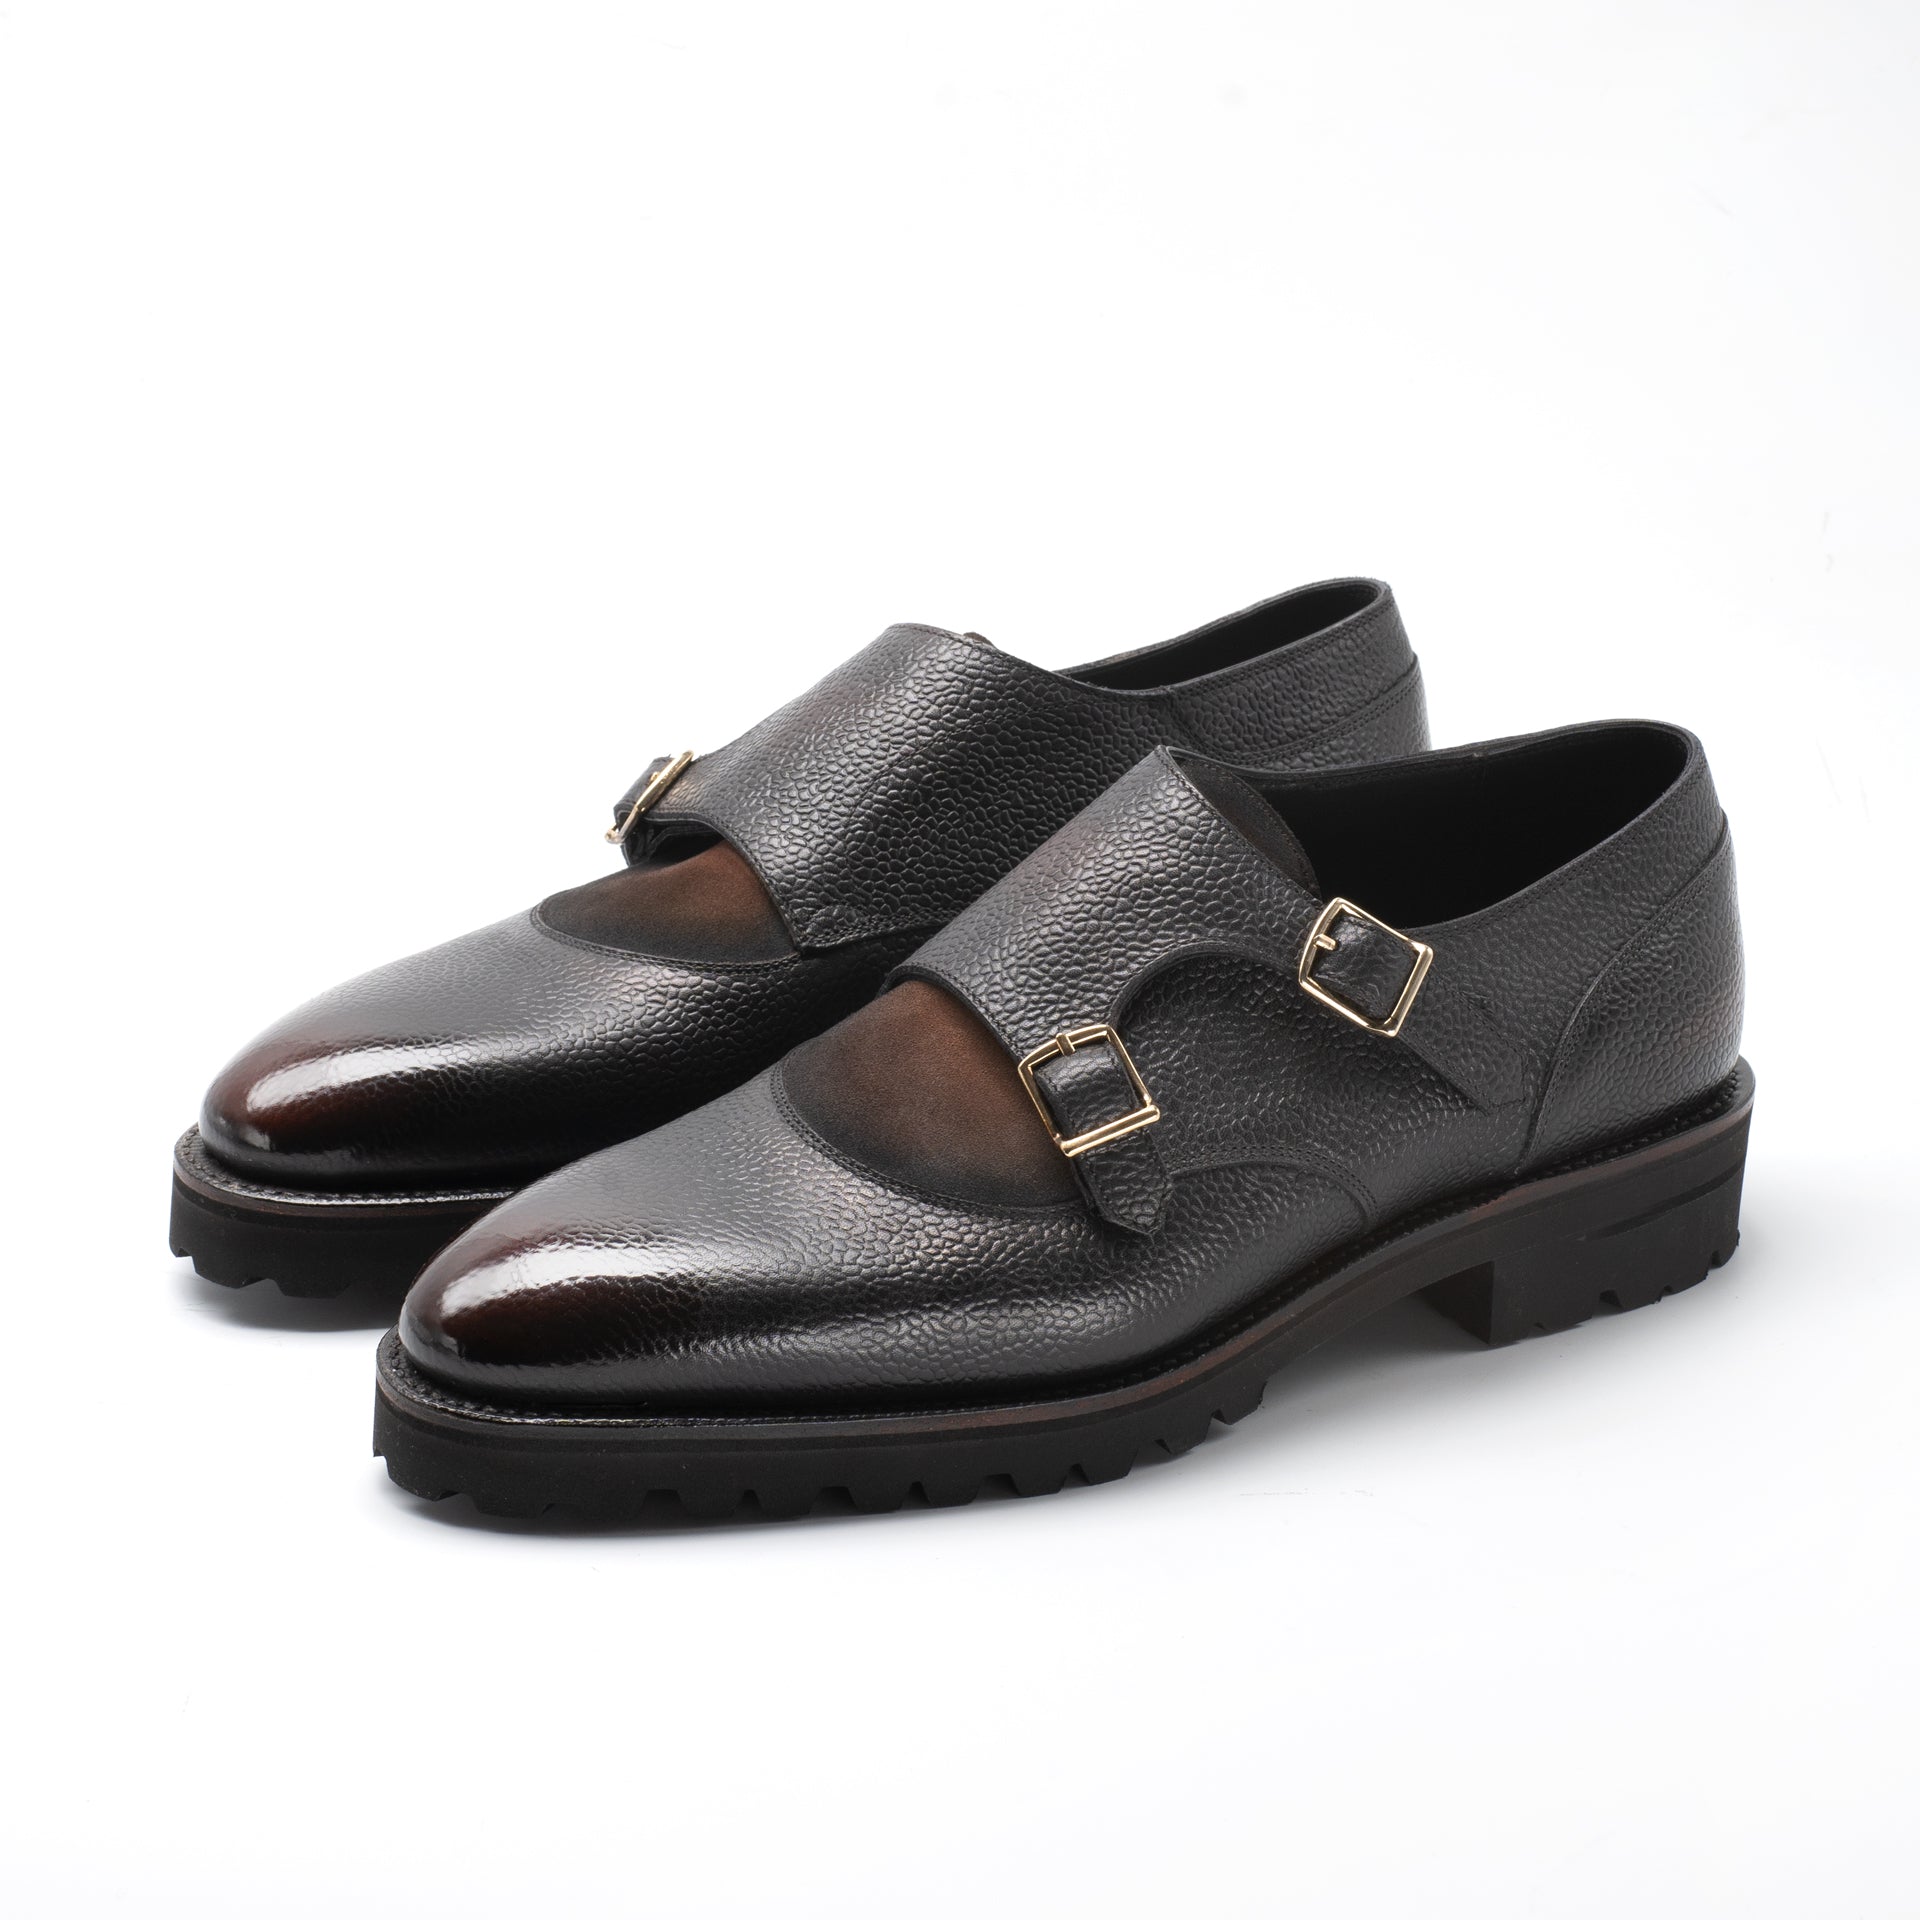 Miquel Decon Double Monk by Norman Vilalta Men’s Goodyear-welted Monk Strap Shoes in Barcelona, Spain